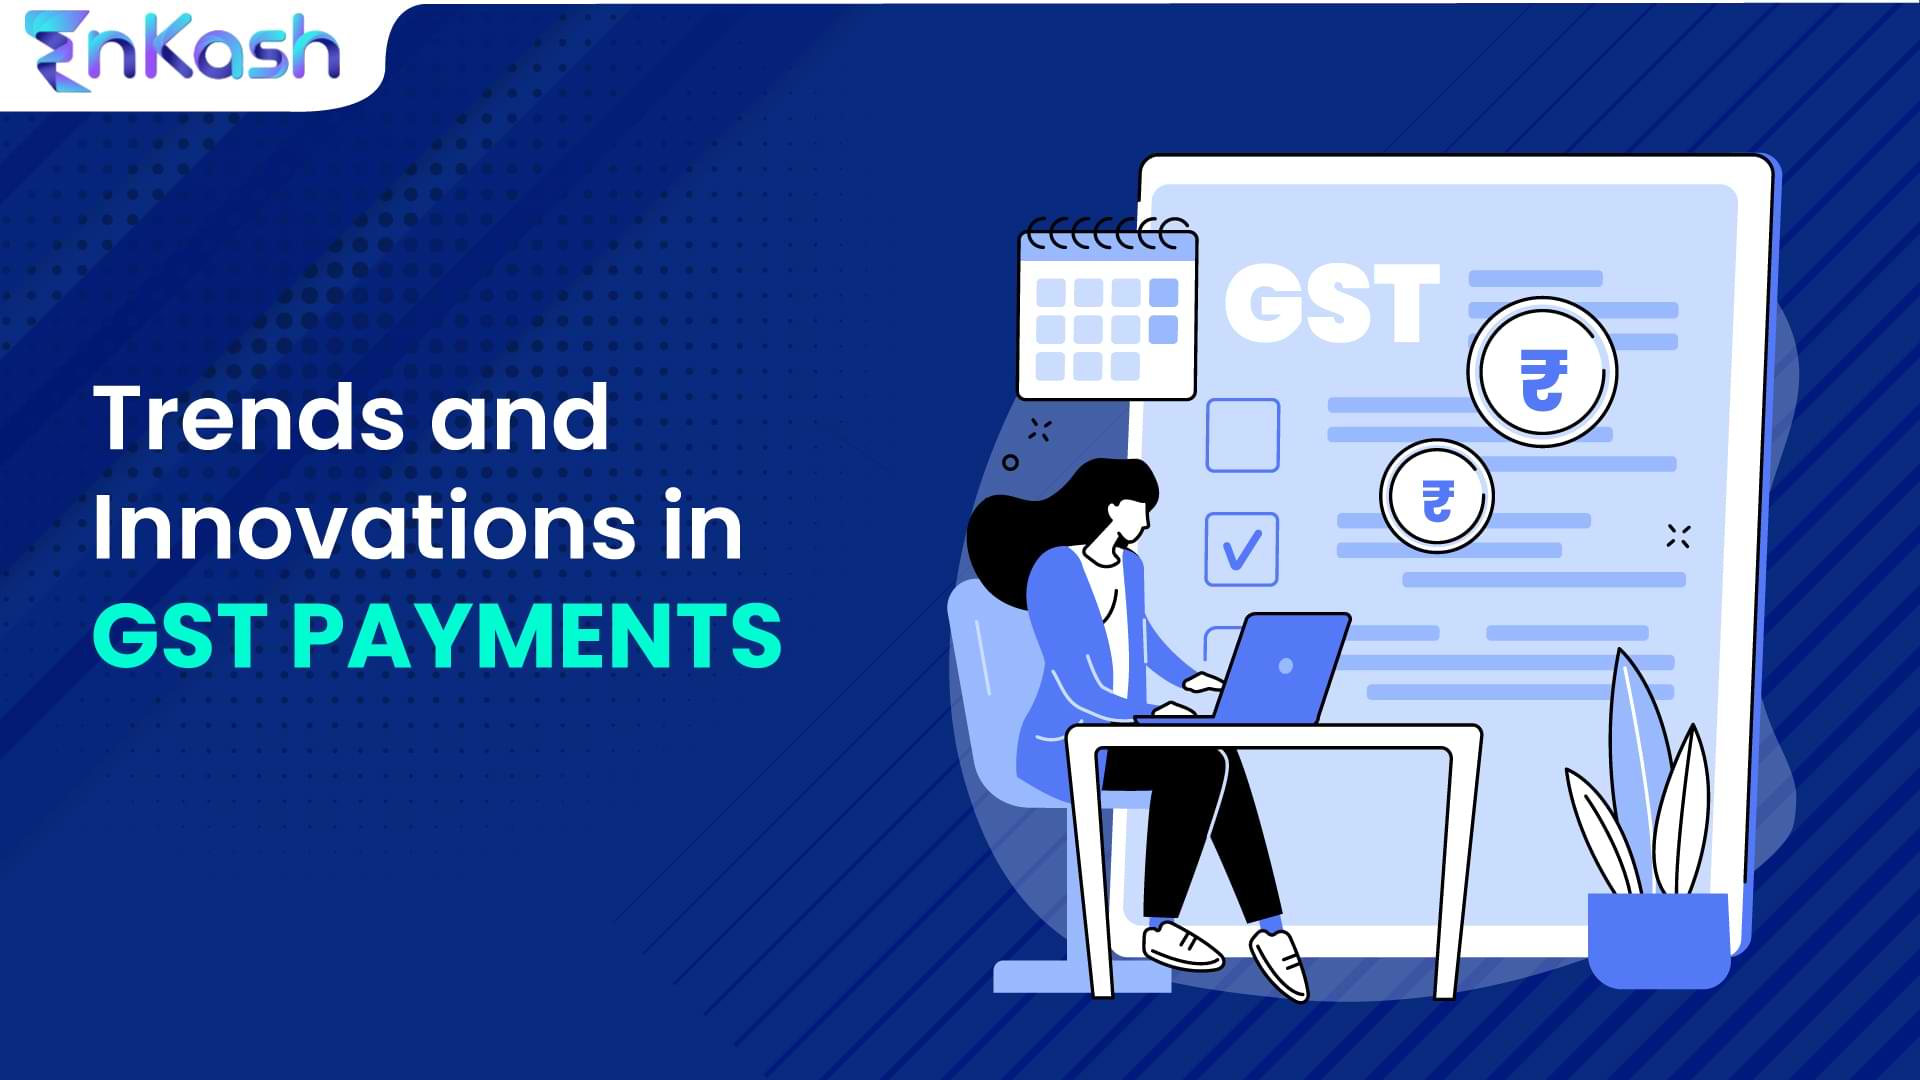 Innovations in GST payments